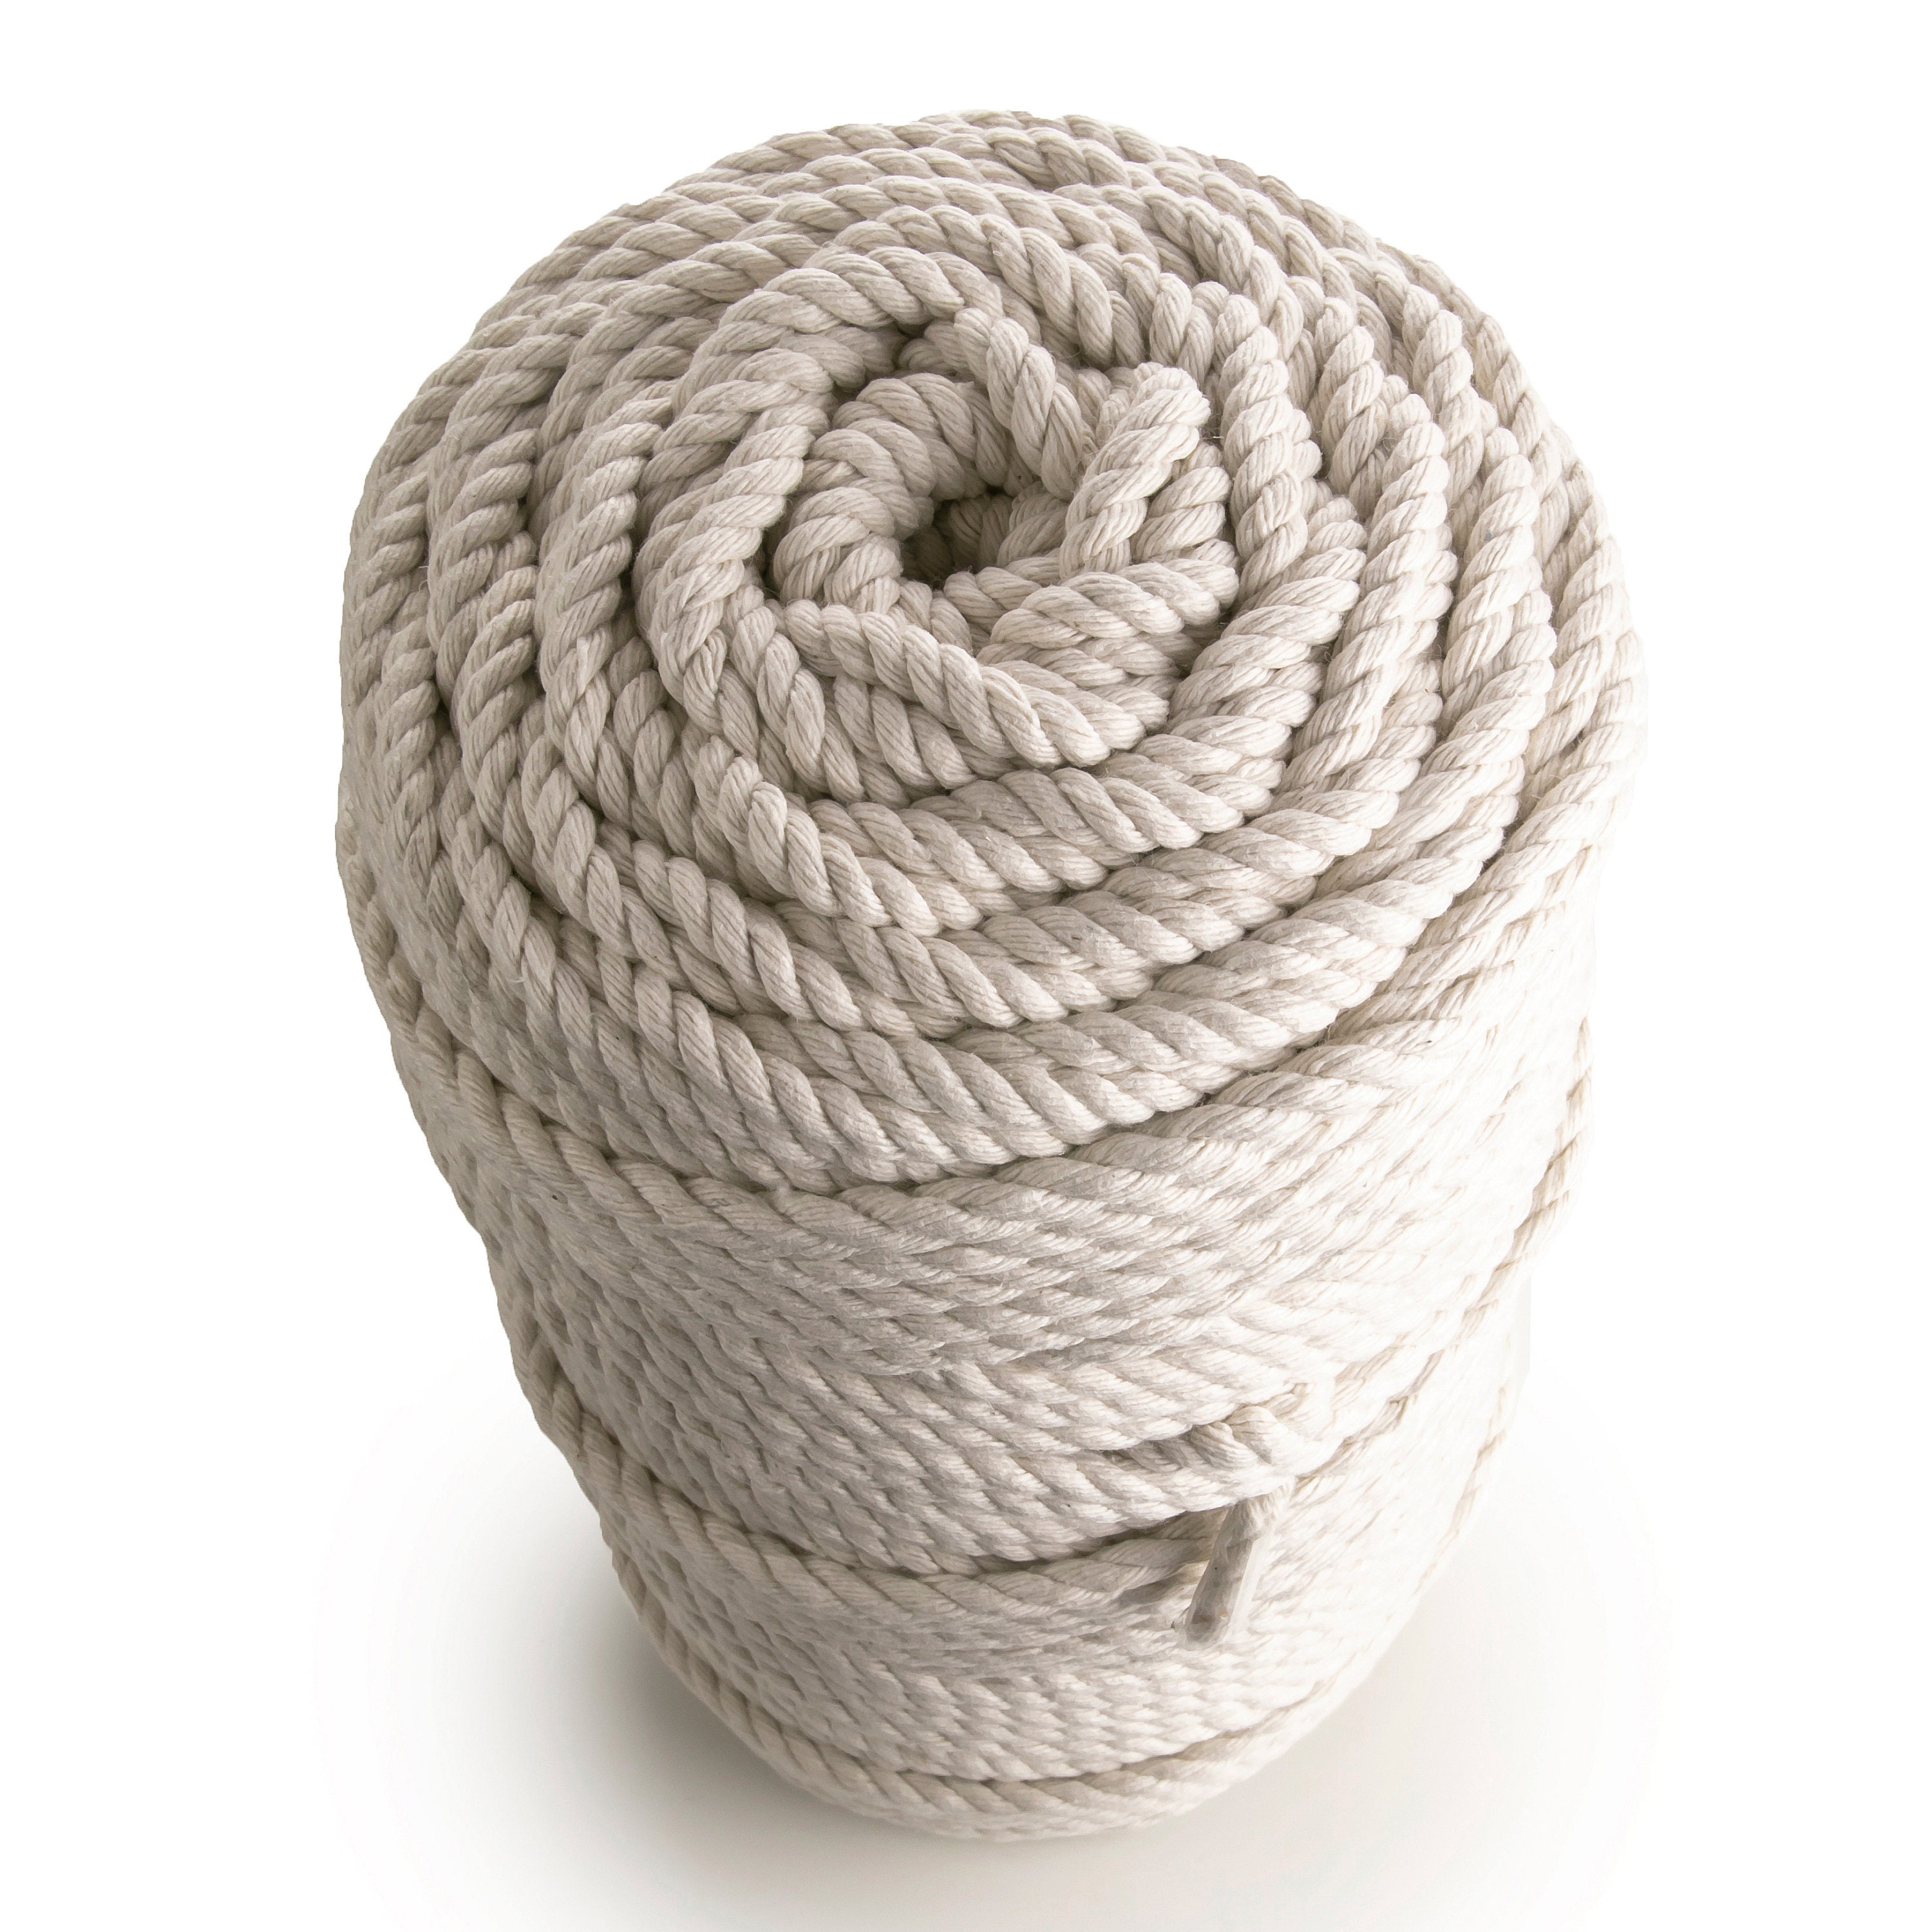 Macrame Cord 4mm Cotton Rope. 3 Kg Twisted Cotton Rope. About 520 M Macrame  Rope Cotton. Cotton Cord Macrame, Beige Macrame Rope, off White 